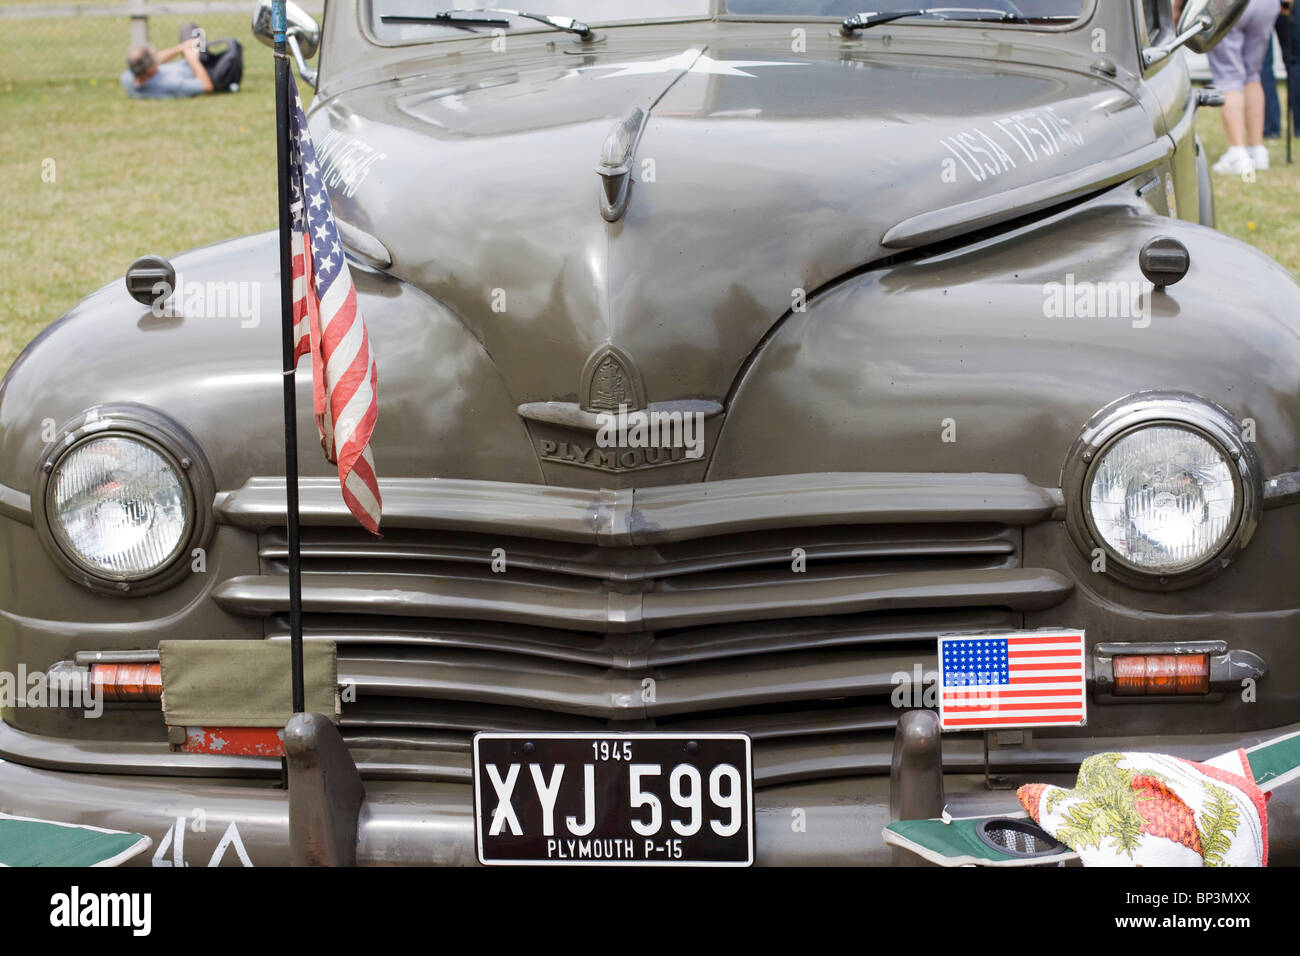 Plymouth Army Car at a show in Cirencester Stock Photo